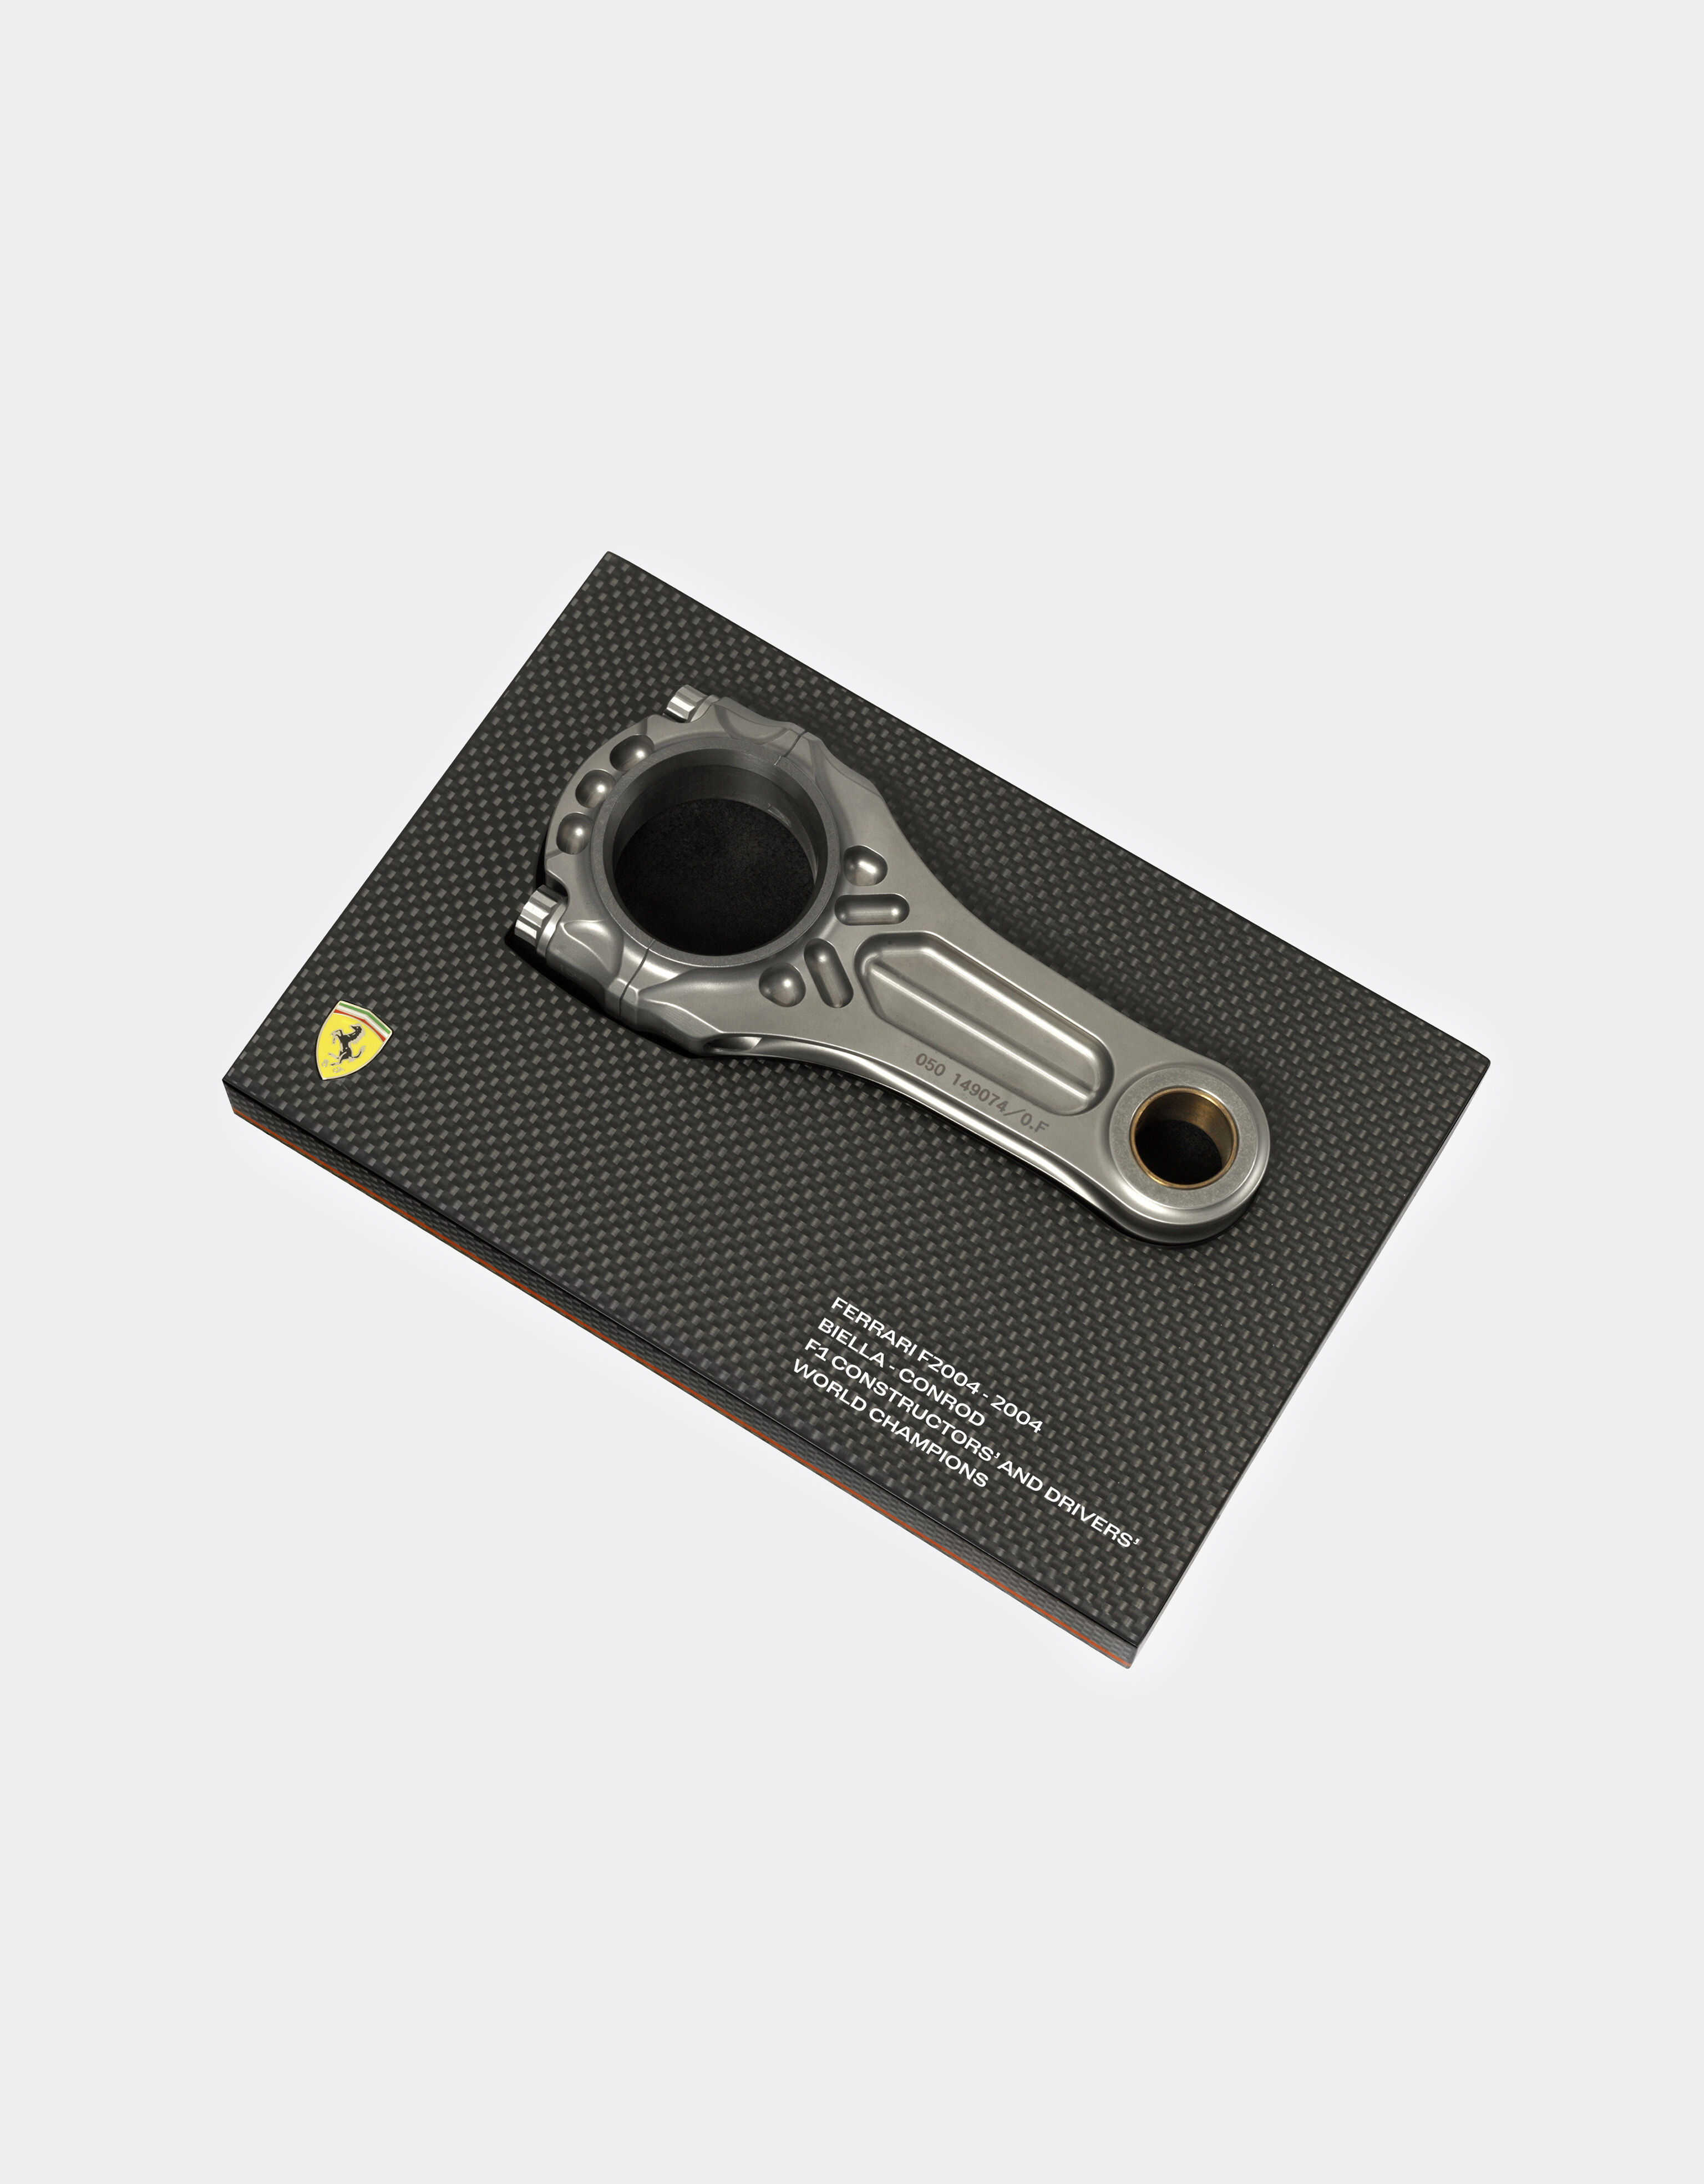 Ferrari Original connecting rod from the F2004, winner of the 2004 Constructors' and Drivers' Championships Red F1348f